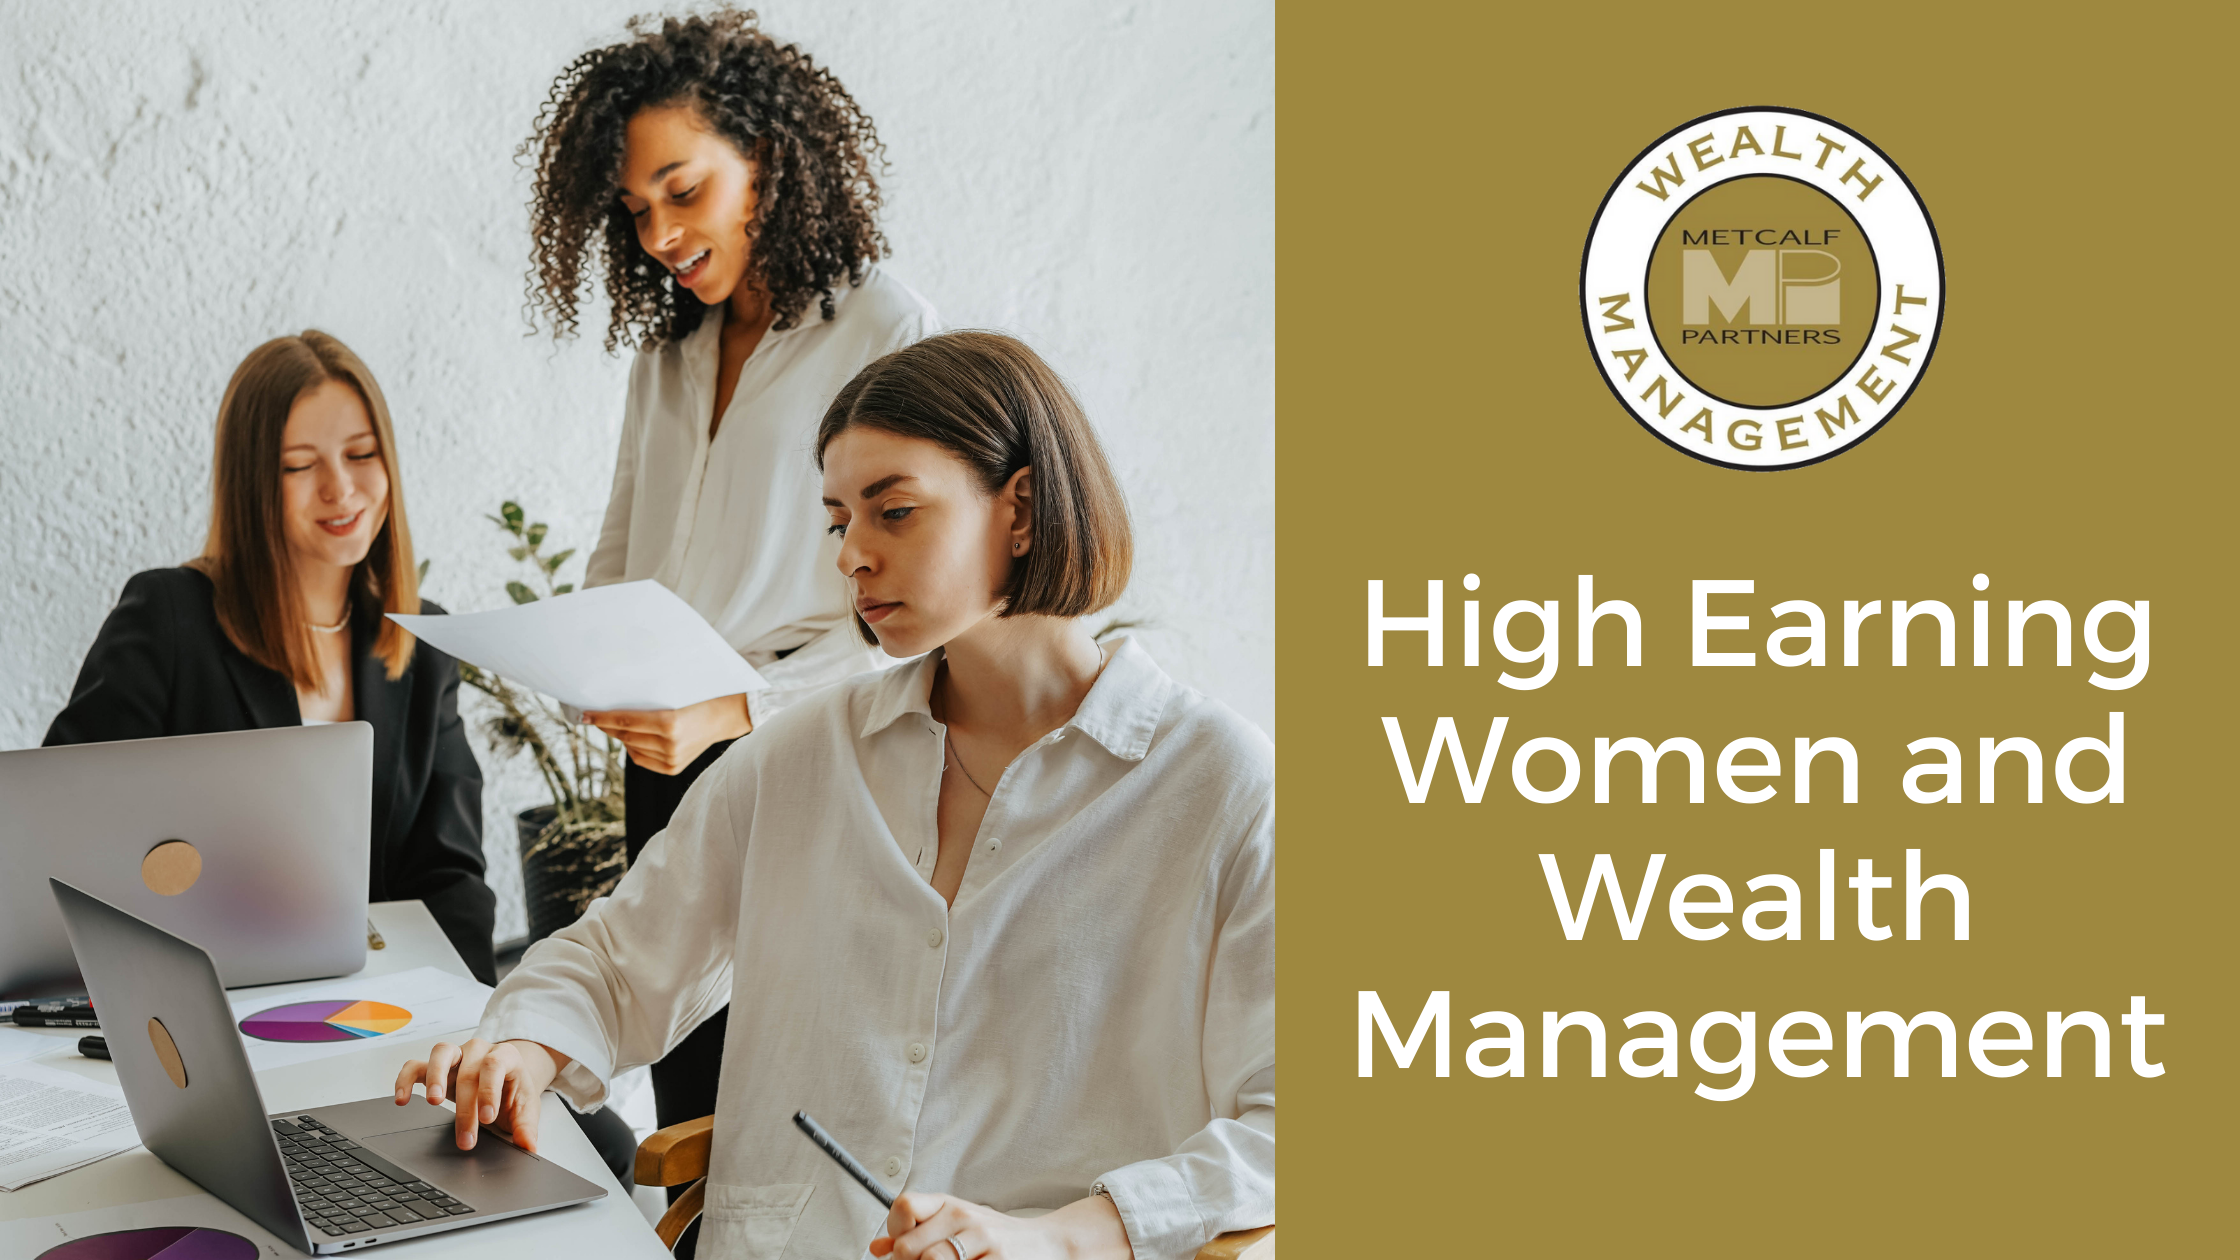 Featured image for “High Earning Women and Wealth Management”